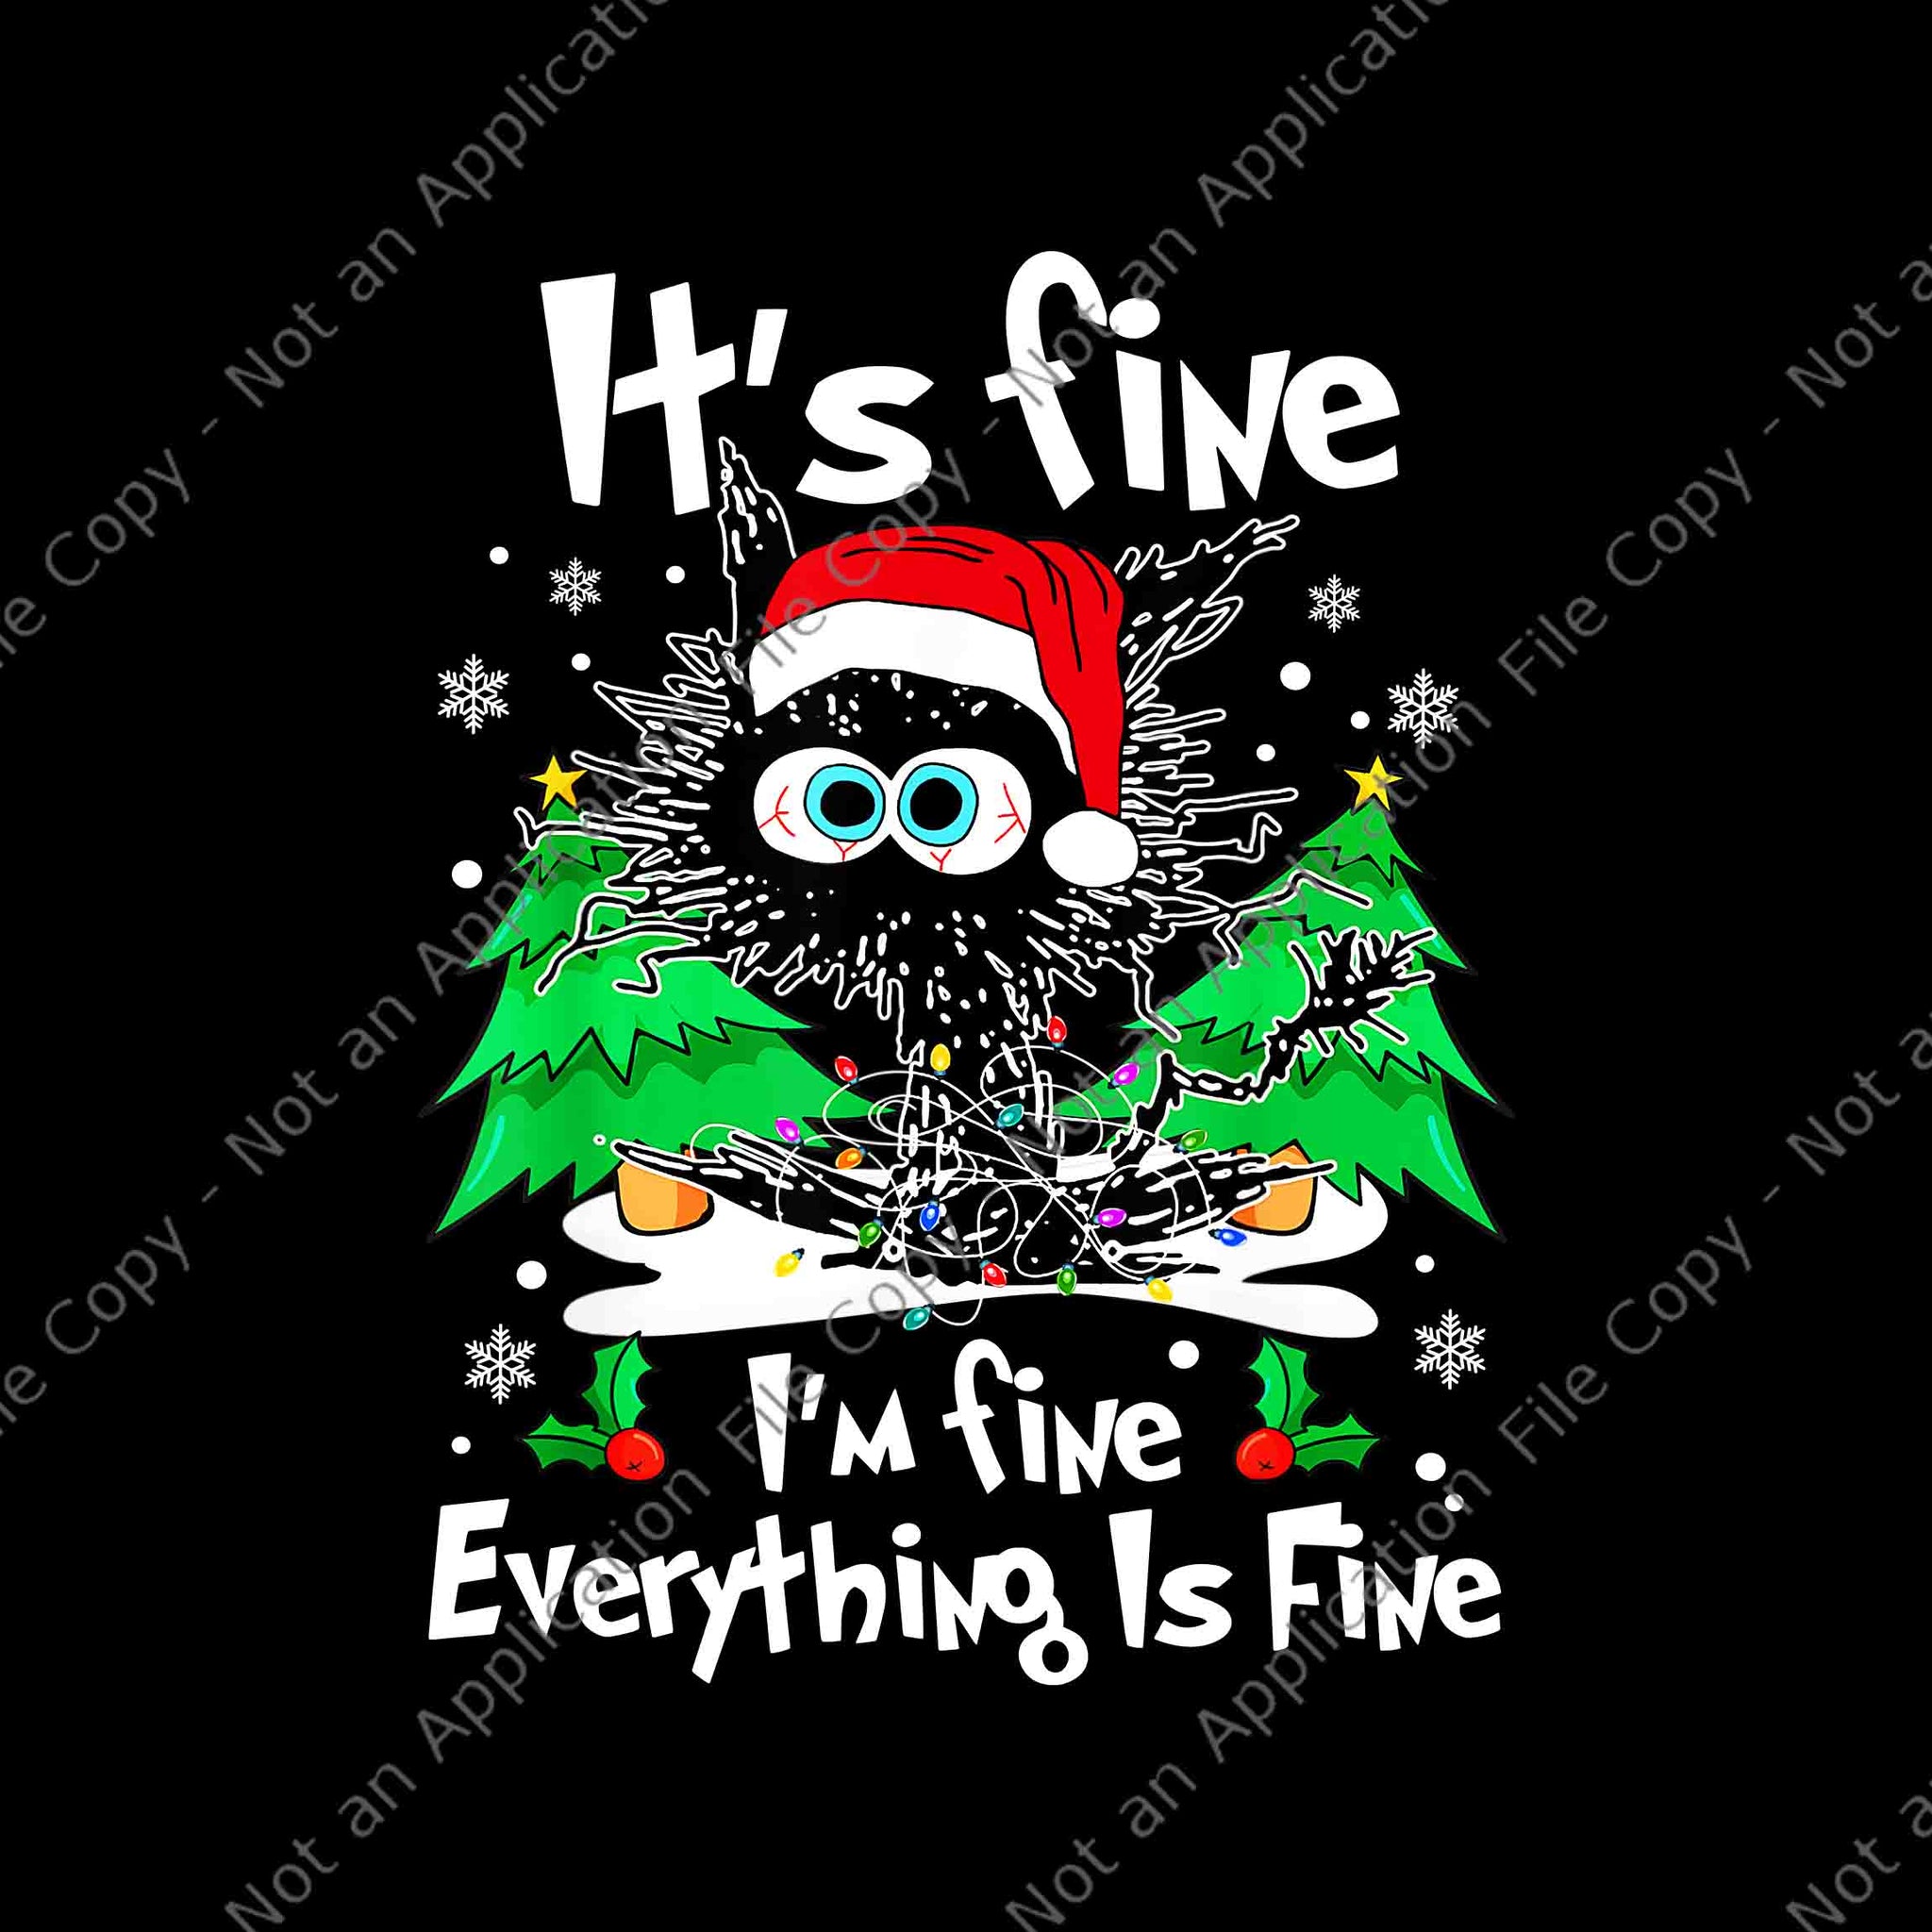 It's Fine I'm Fine Everything Is Fine Black Cat Christmas Png, Black Cat Christmas Png, Cat Christmas Png, Cat Tree Xmas Png